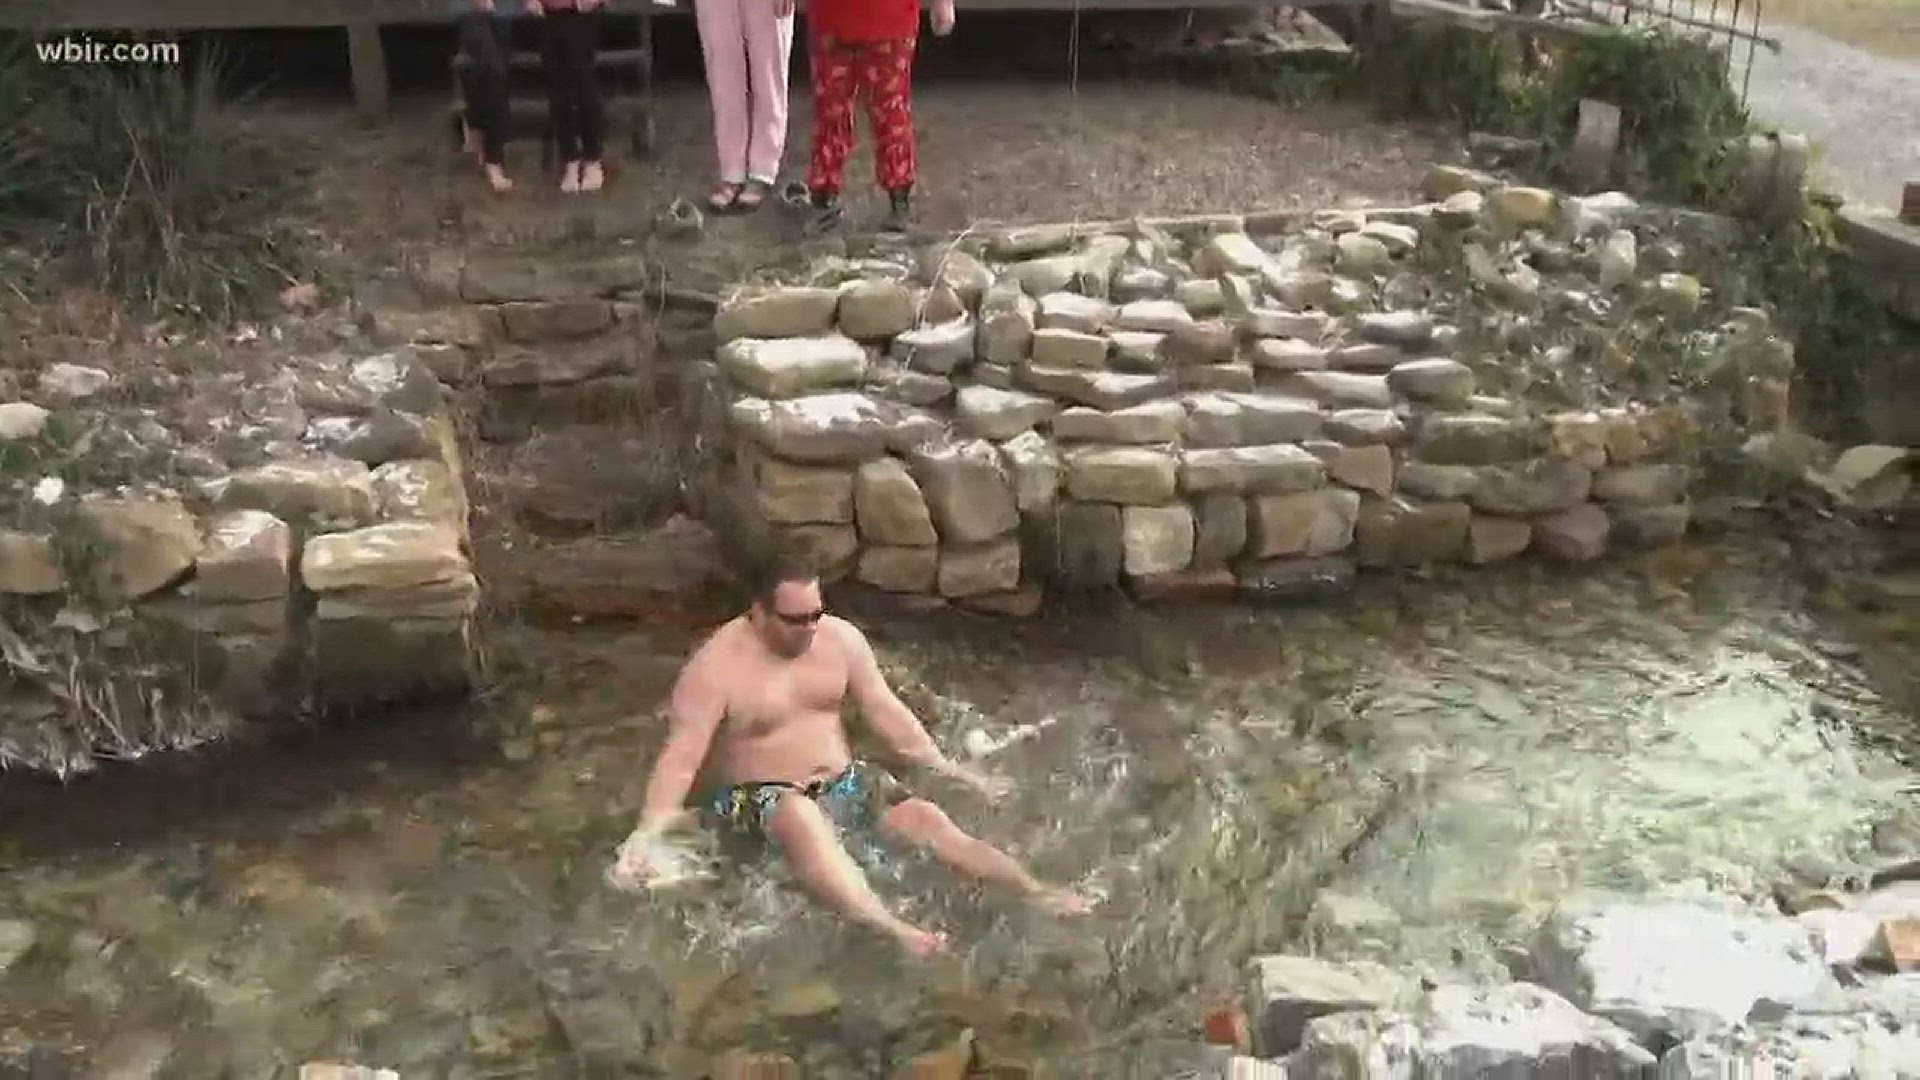 Jan. 1, 2018: The official New Year's Day polar dip in Cumberland Gap was canceled, but some swimmers decided to carry on the tradition on their own.